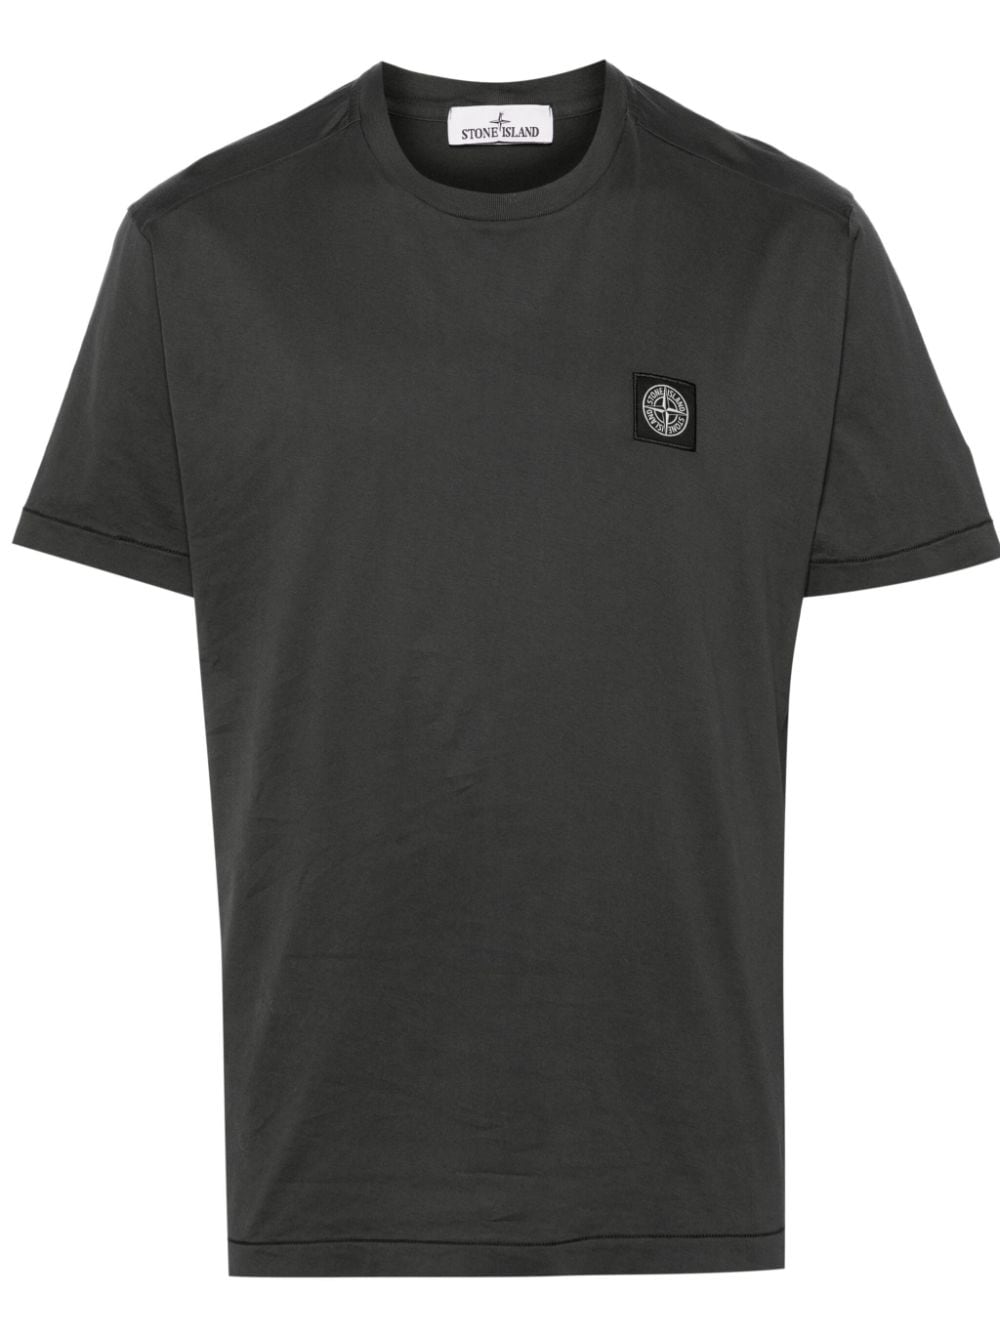 Stone Island - T-Shirt Charcoal 24113 - Lothaire